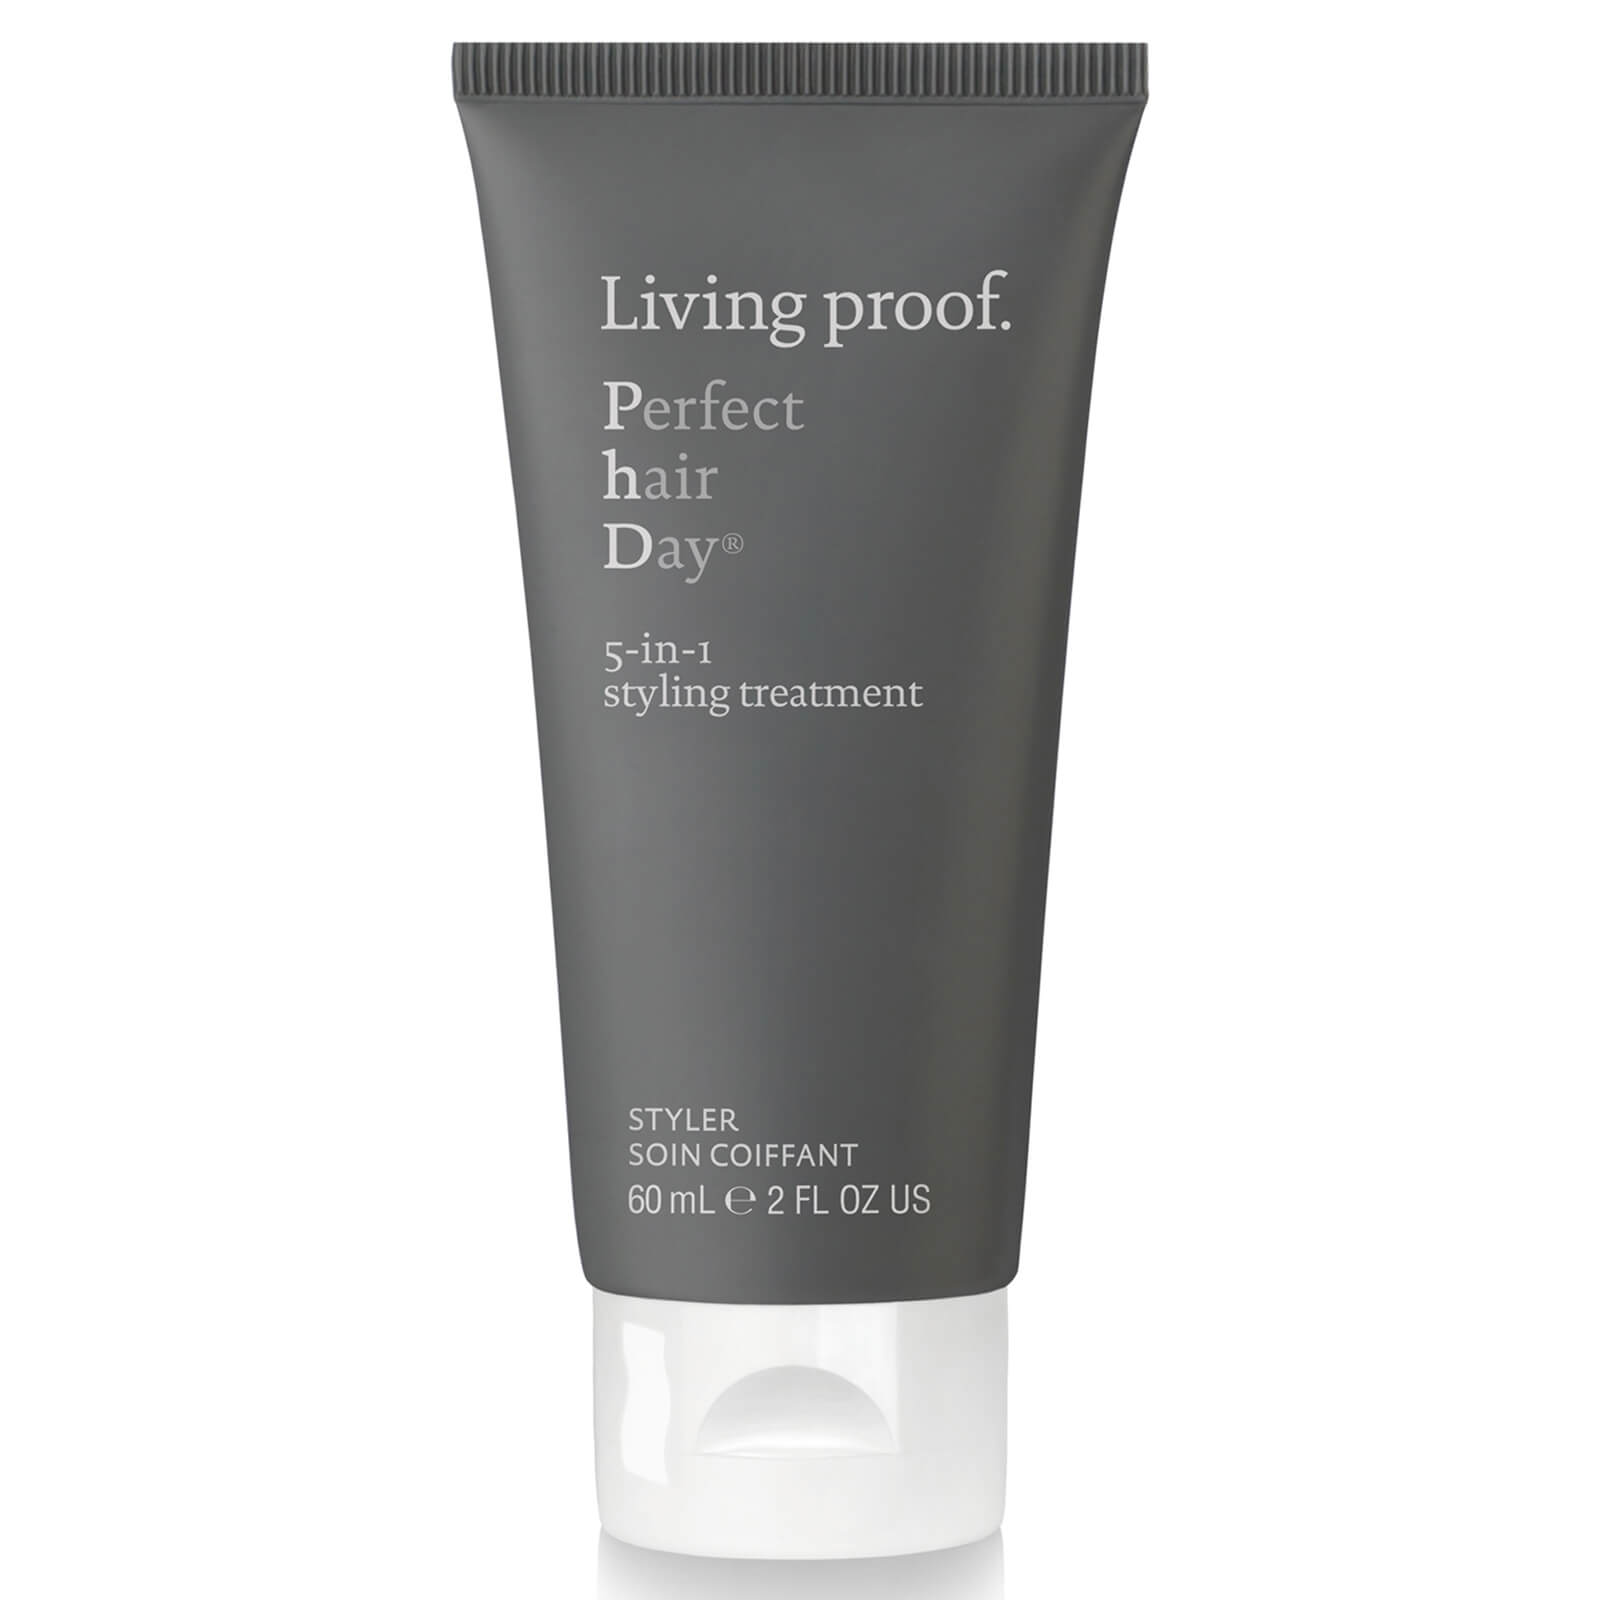 Living Proof Perfect Hair Day (PhD) trattamento 5 in 1 per lo styling 60 ml